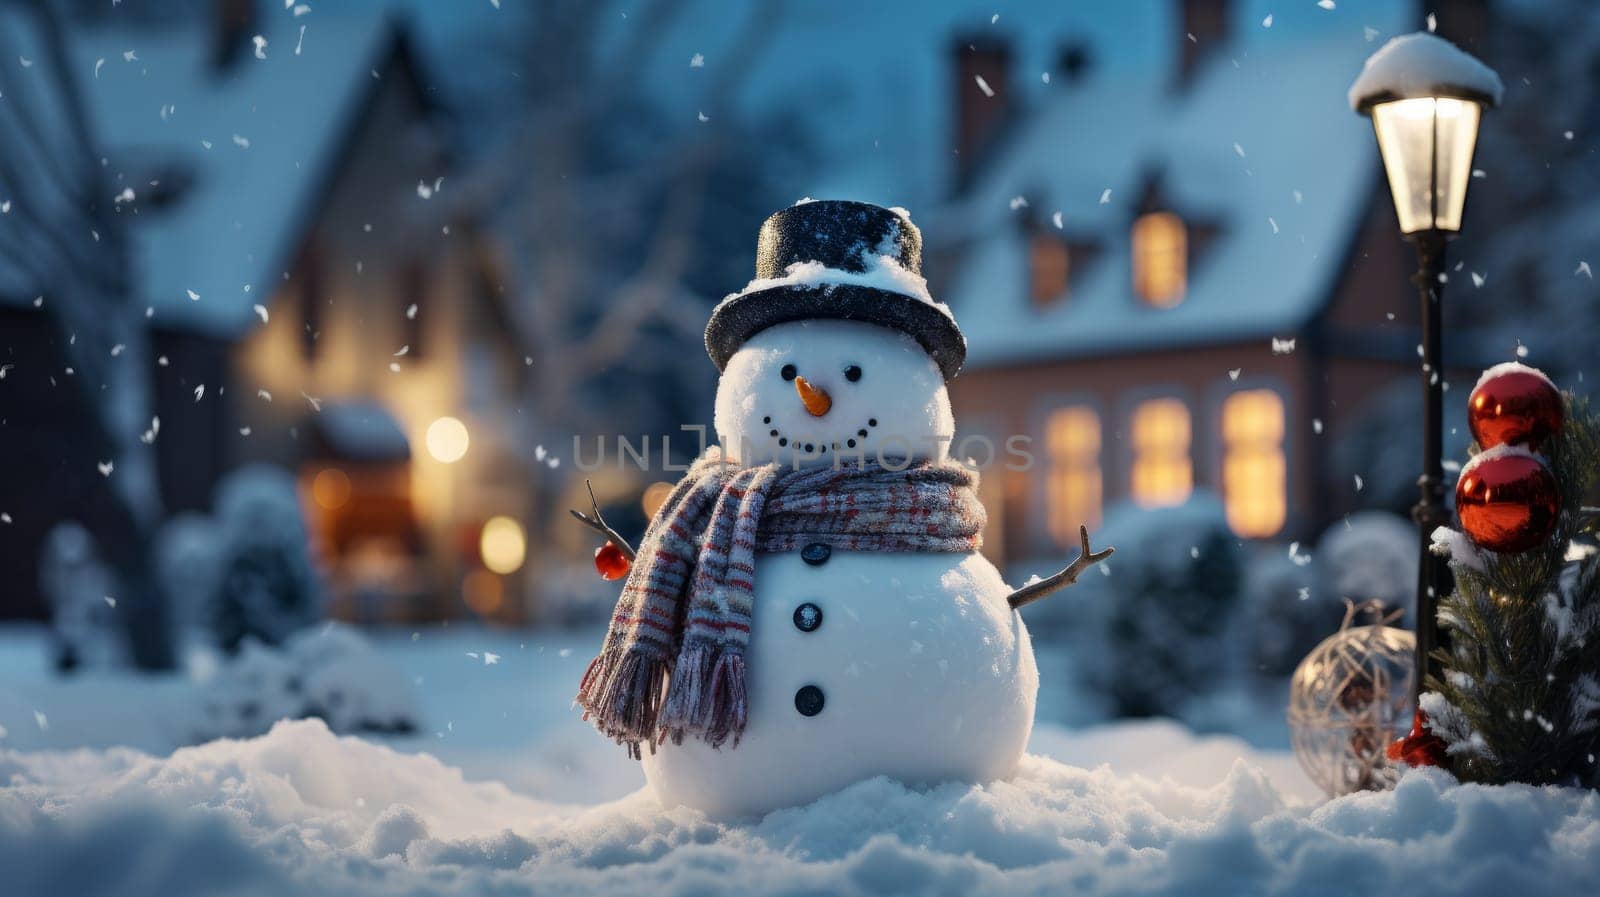 Winter landscape with snowman and cozy family house, AI by but_photo